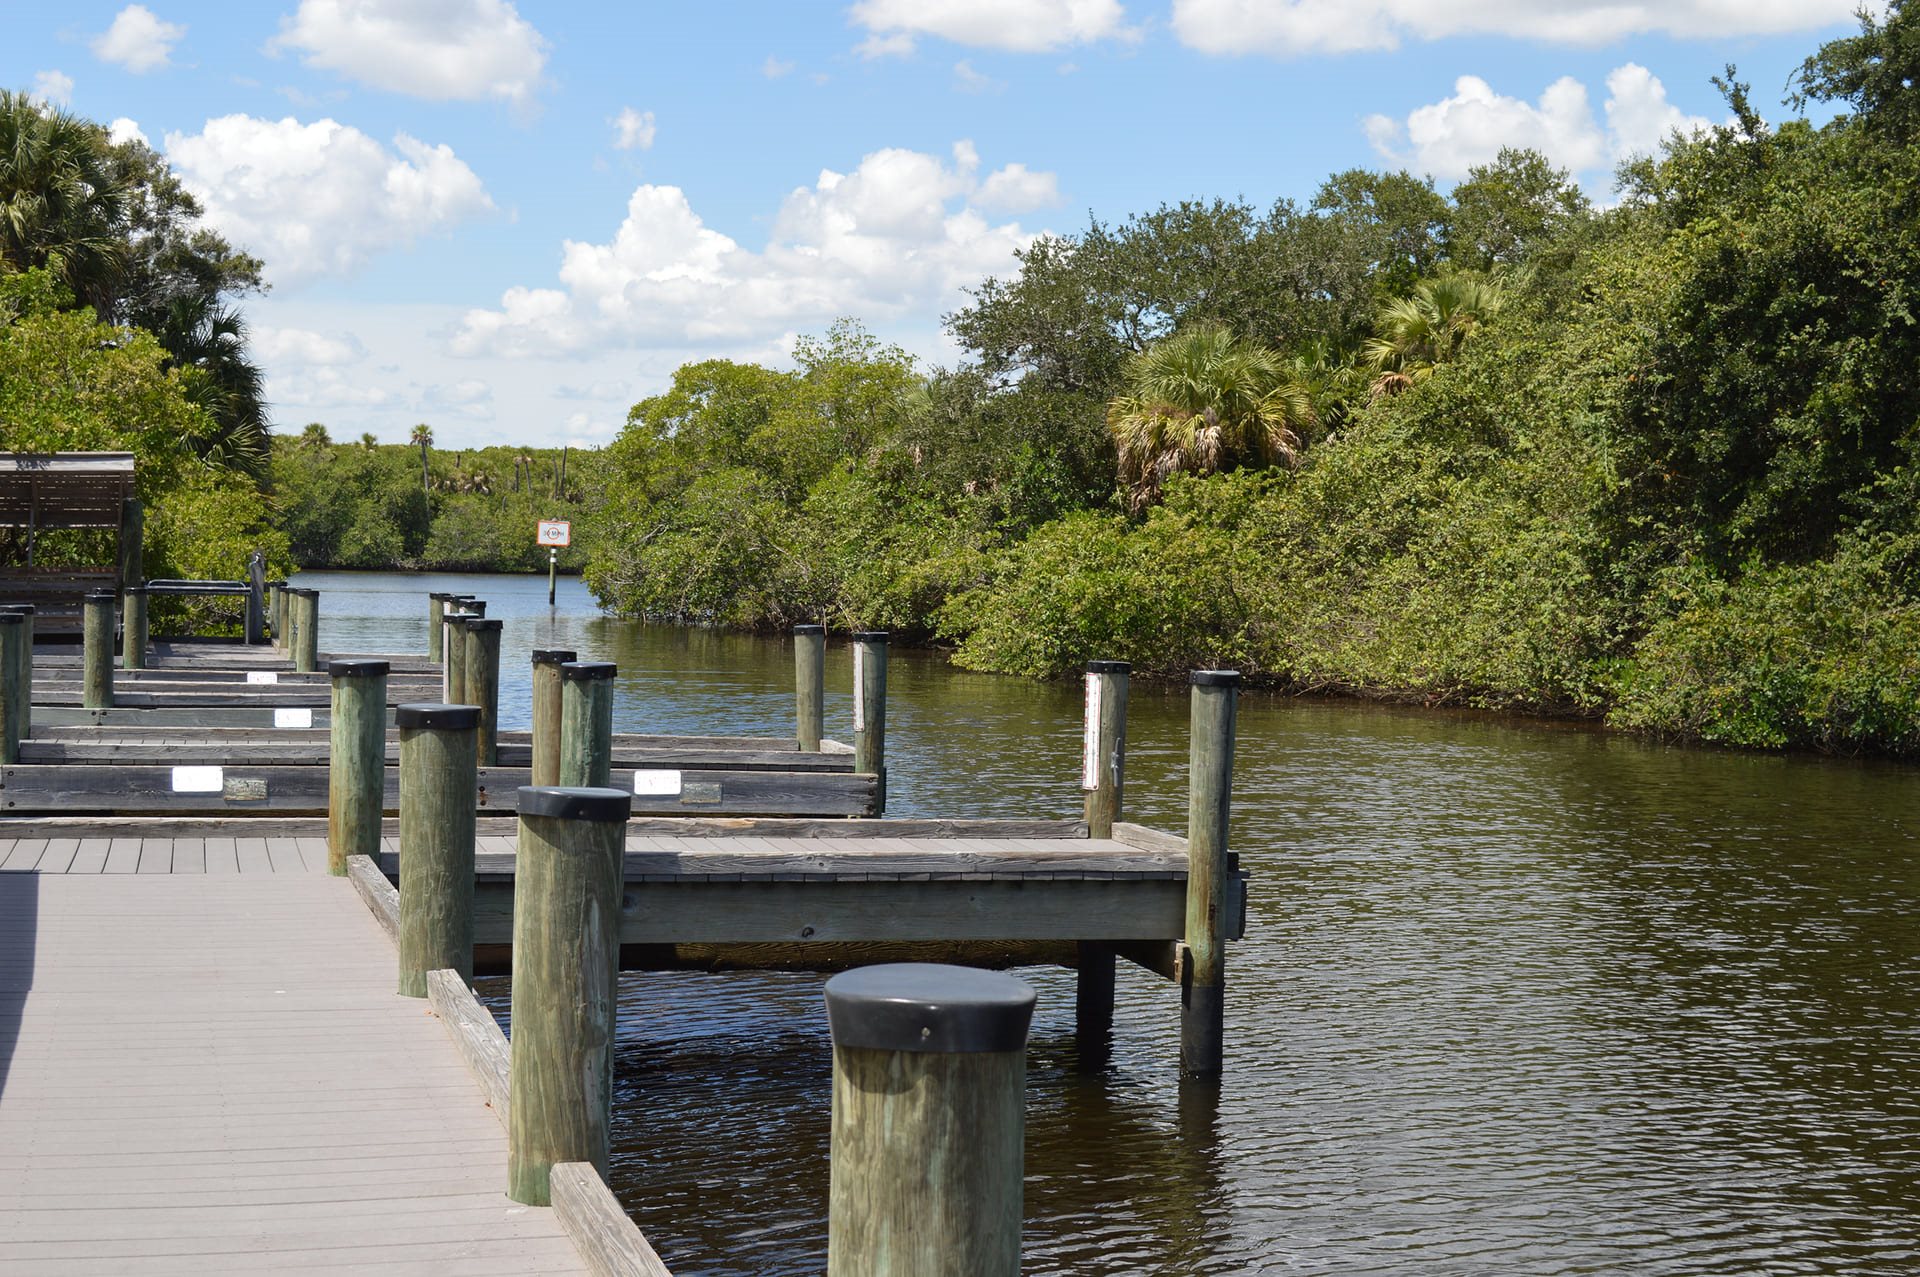 Port St. Lucie & Fort Pierce, Florida: Beaches, nature and recreation.